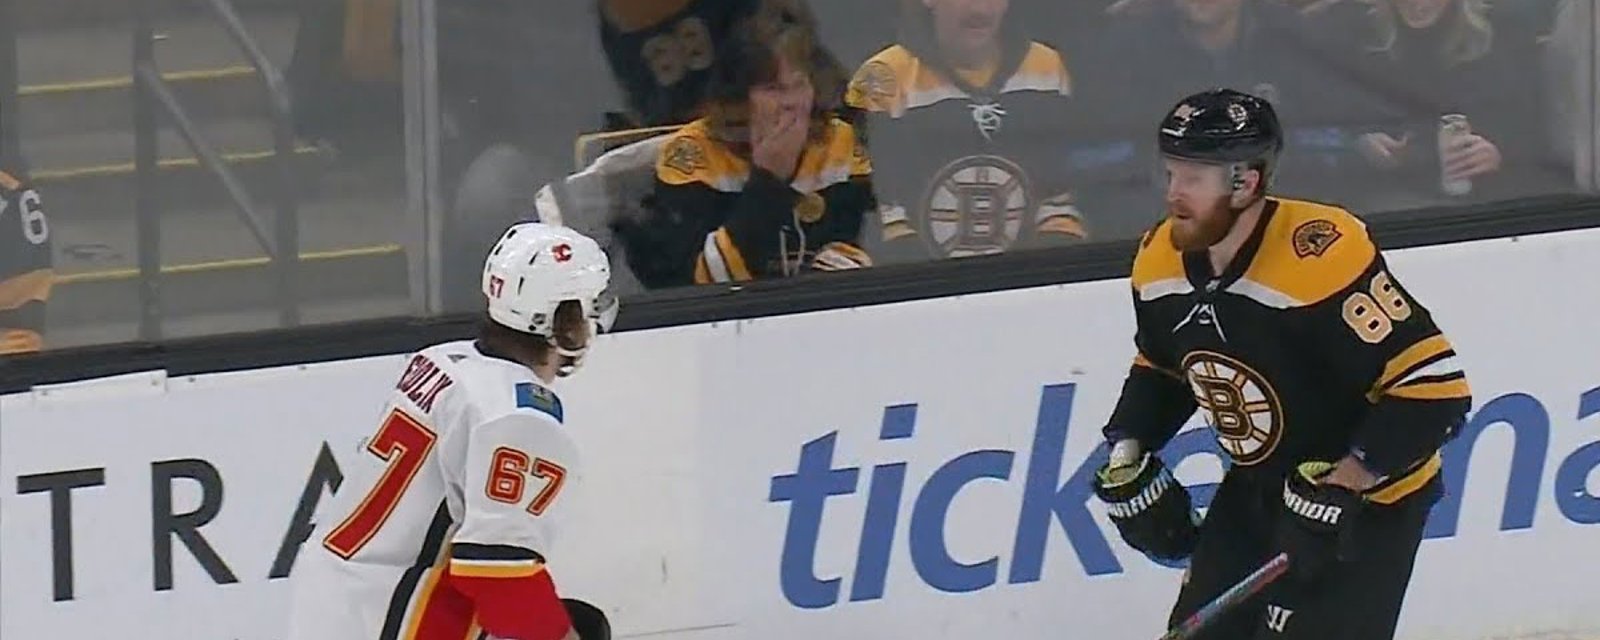 Flames’ Frolik chickens out of fight with Bruins’ Miller following brutal hit 